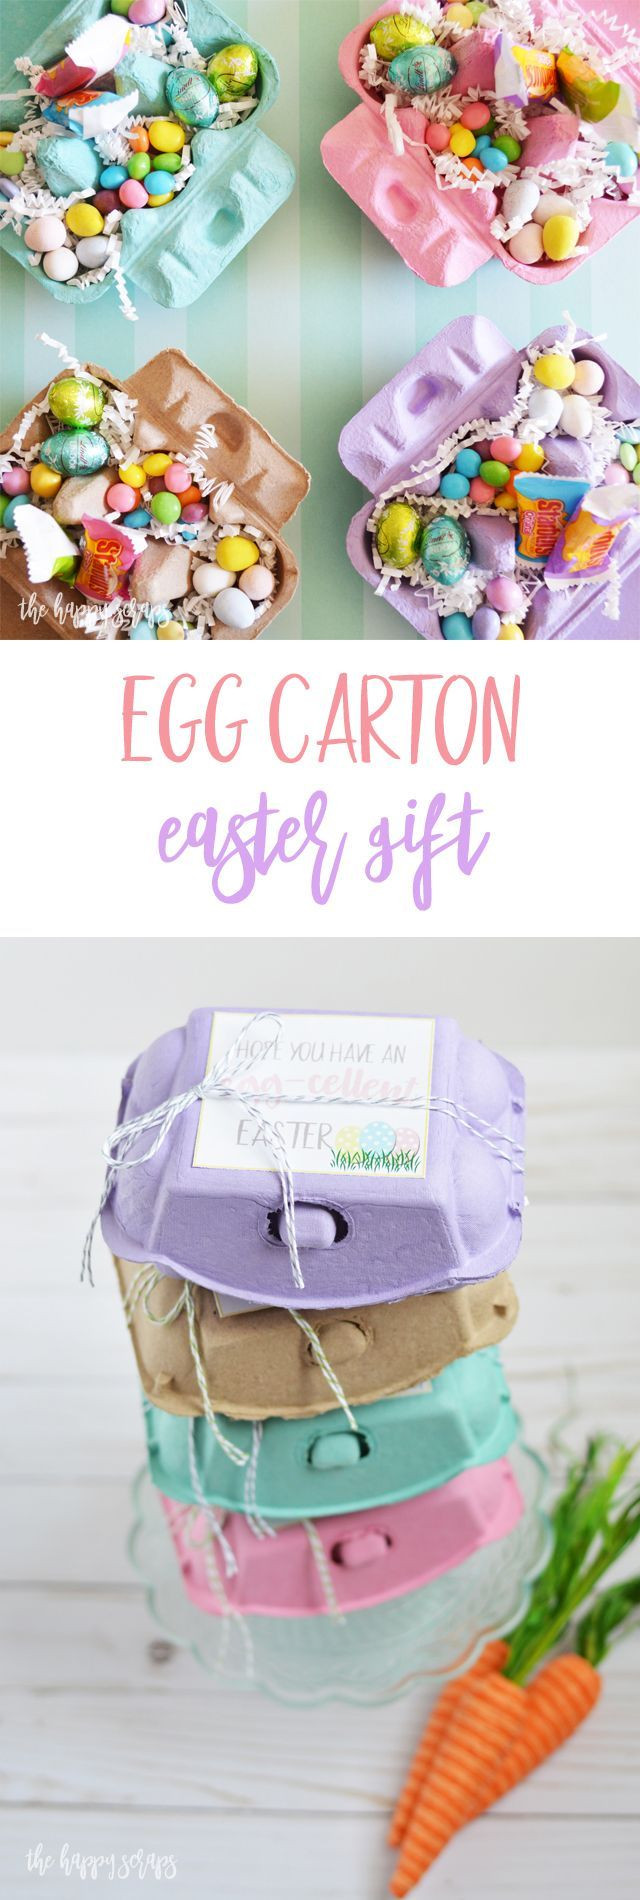 Easter Gifts For Friends
 Egg Carton Easter Gift